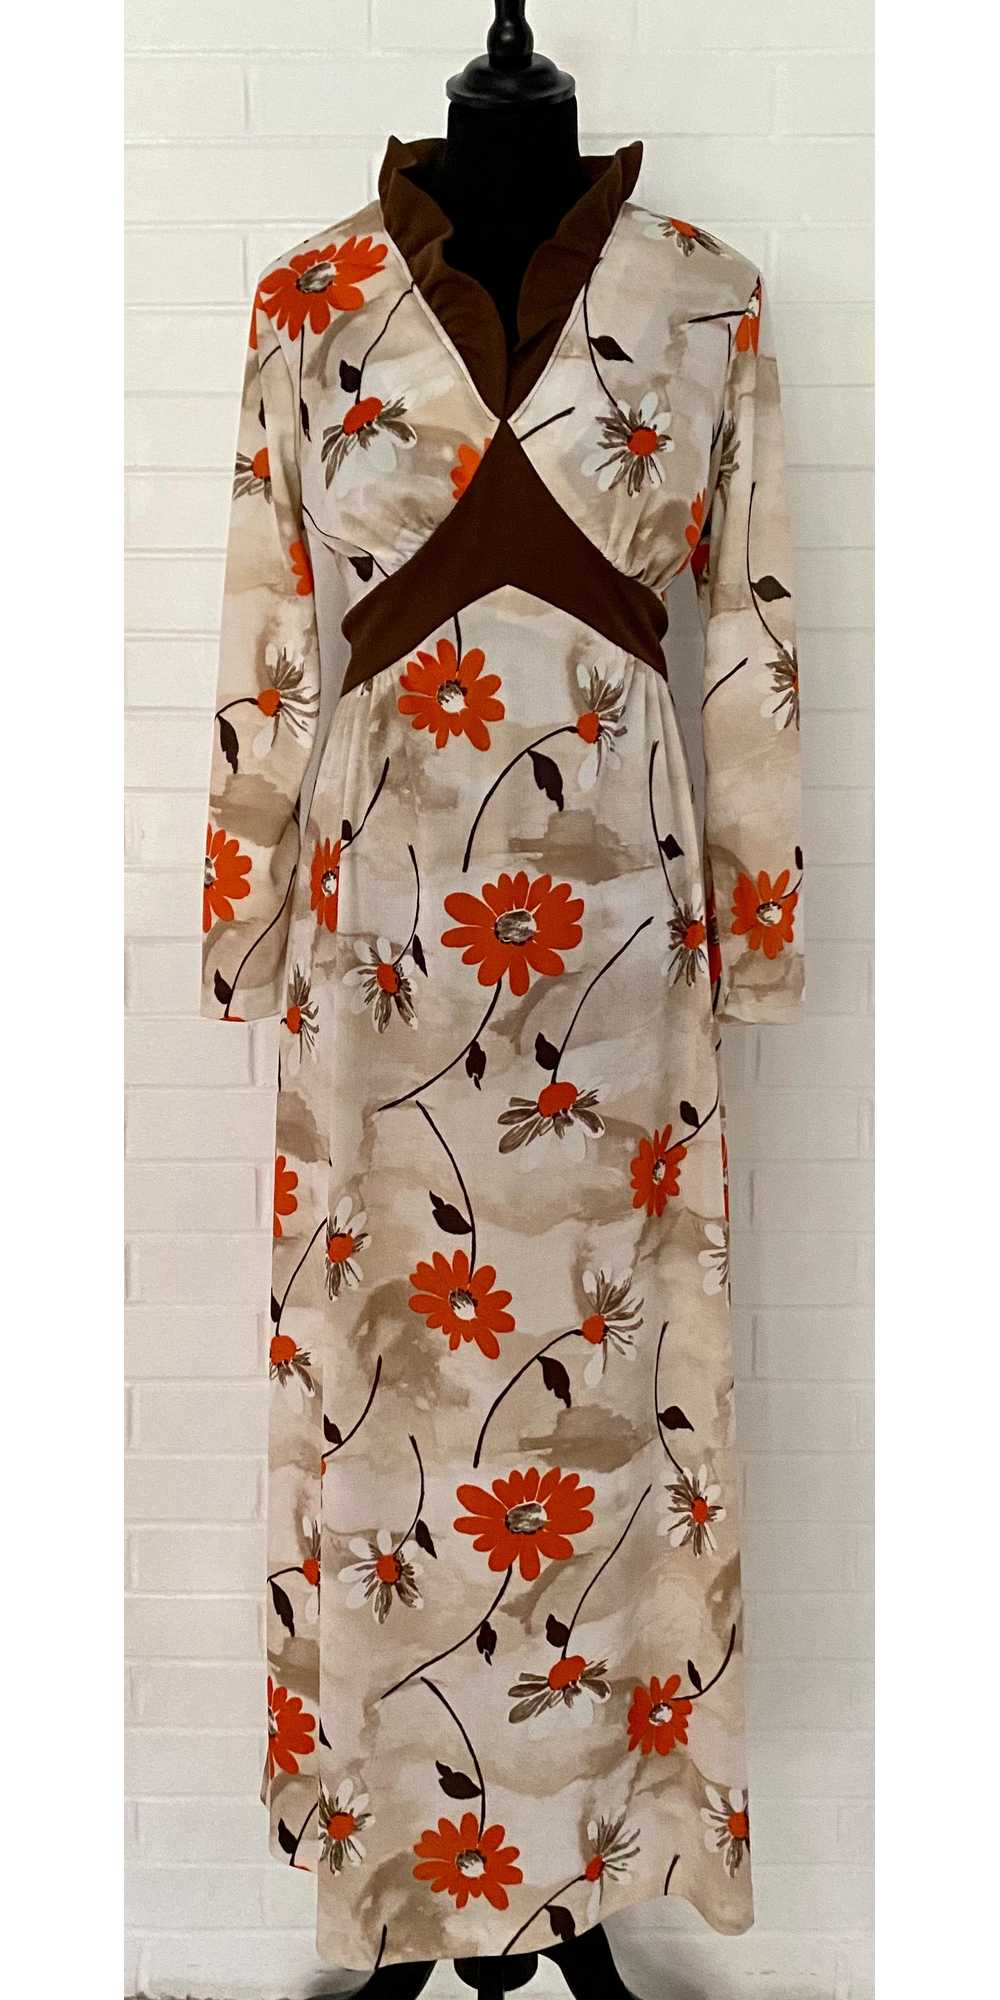 Late 60s/ Early 70s Flowered Maxi Dress - image 1